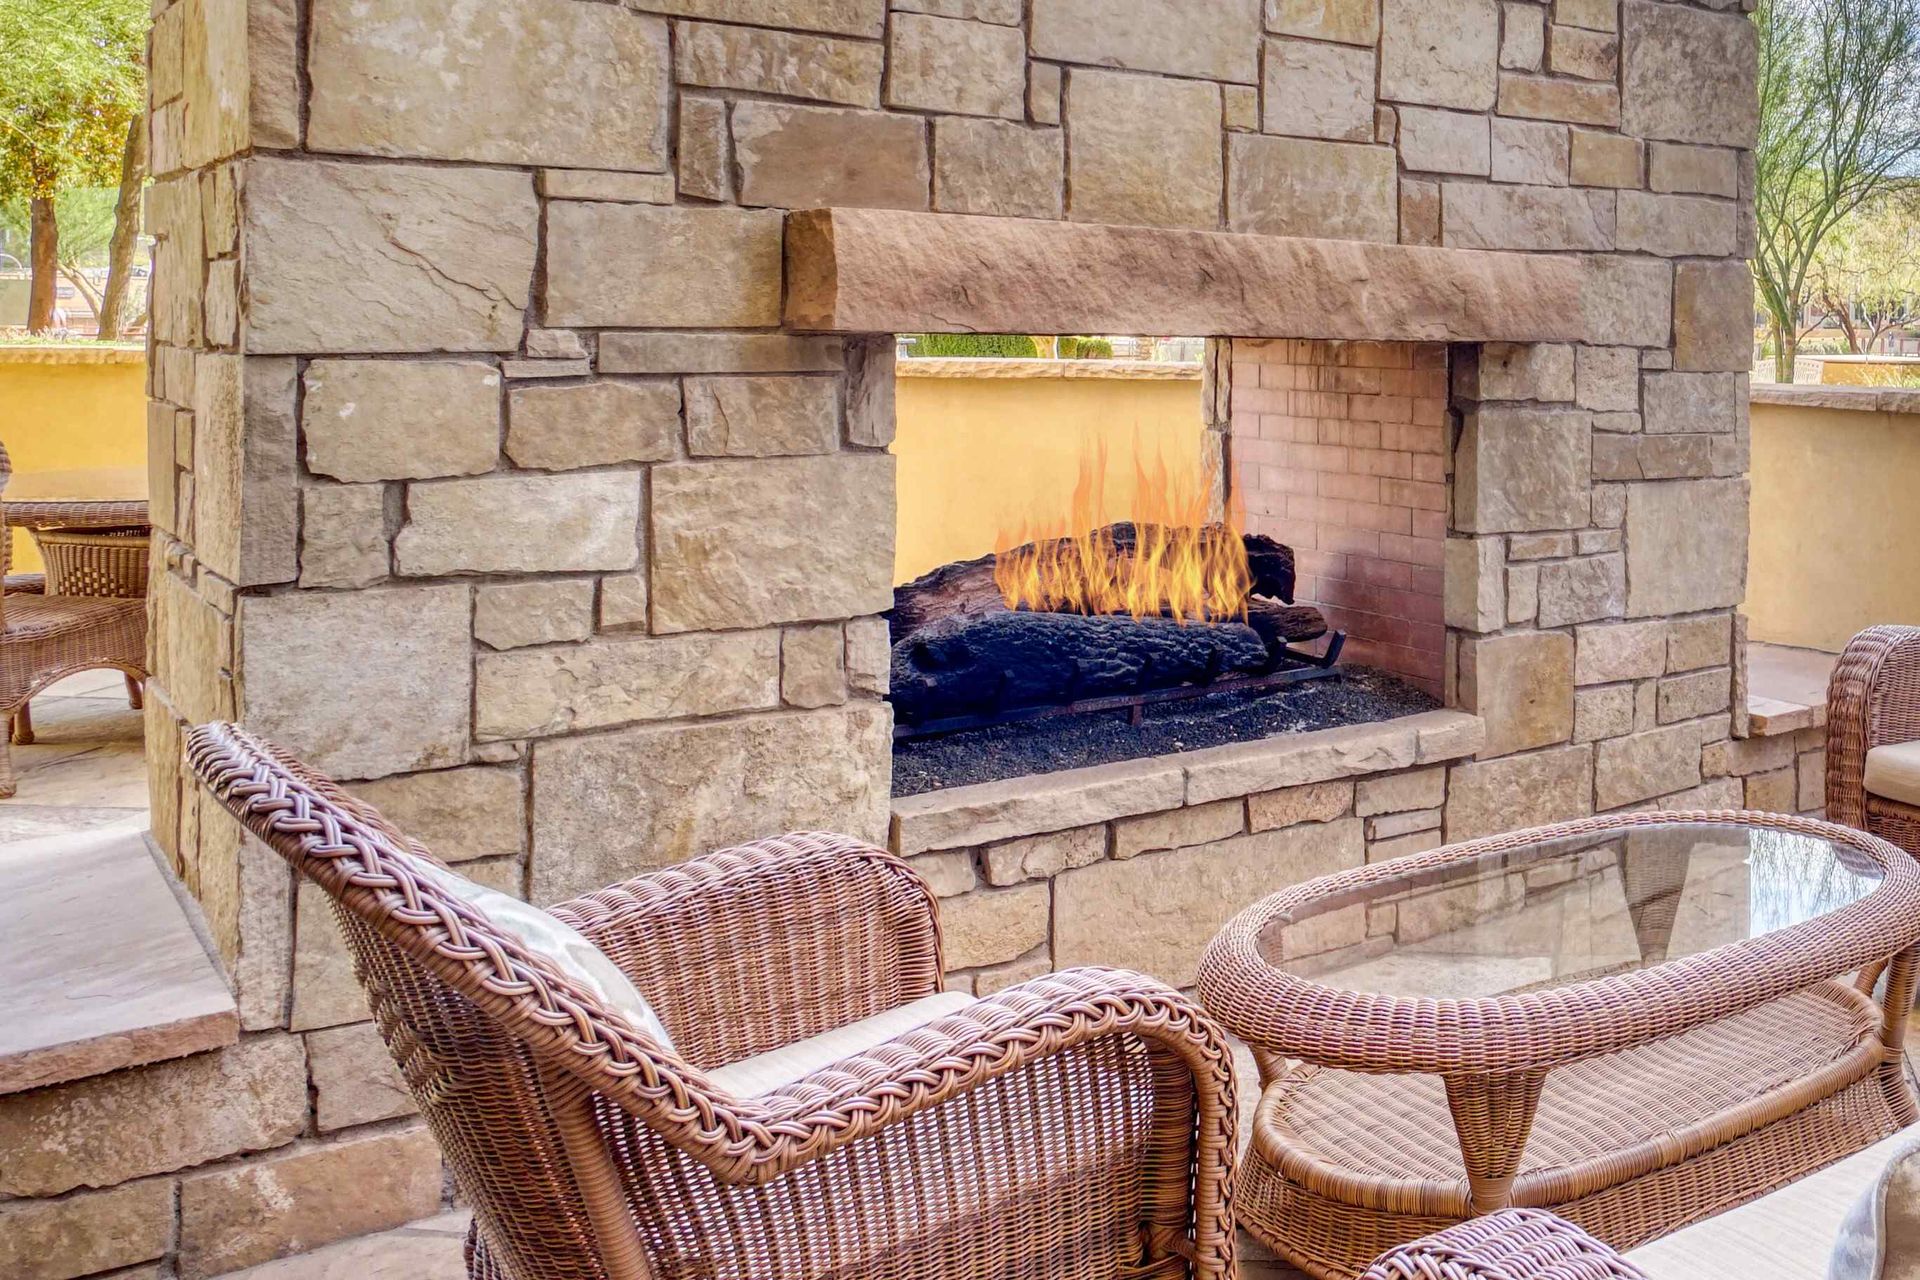 A custom fire pit installed in a brick wall